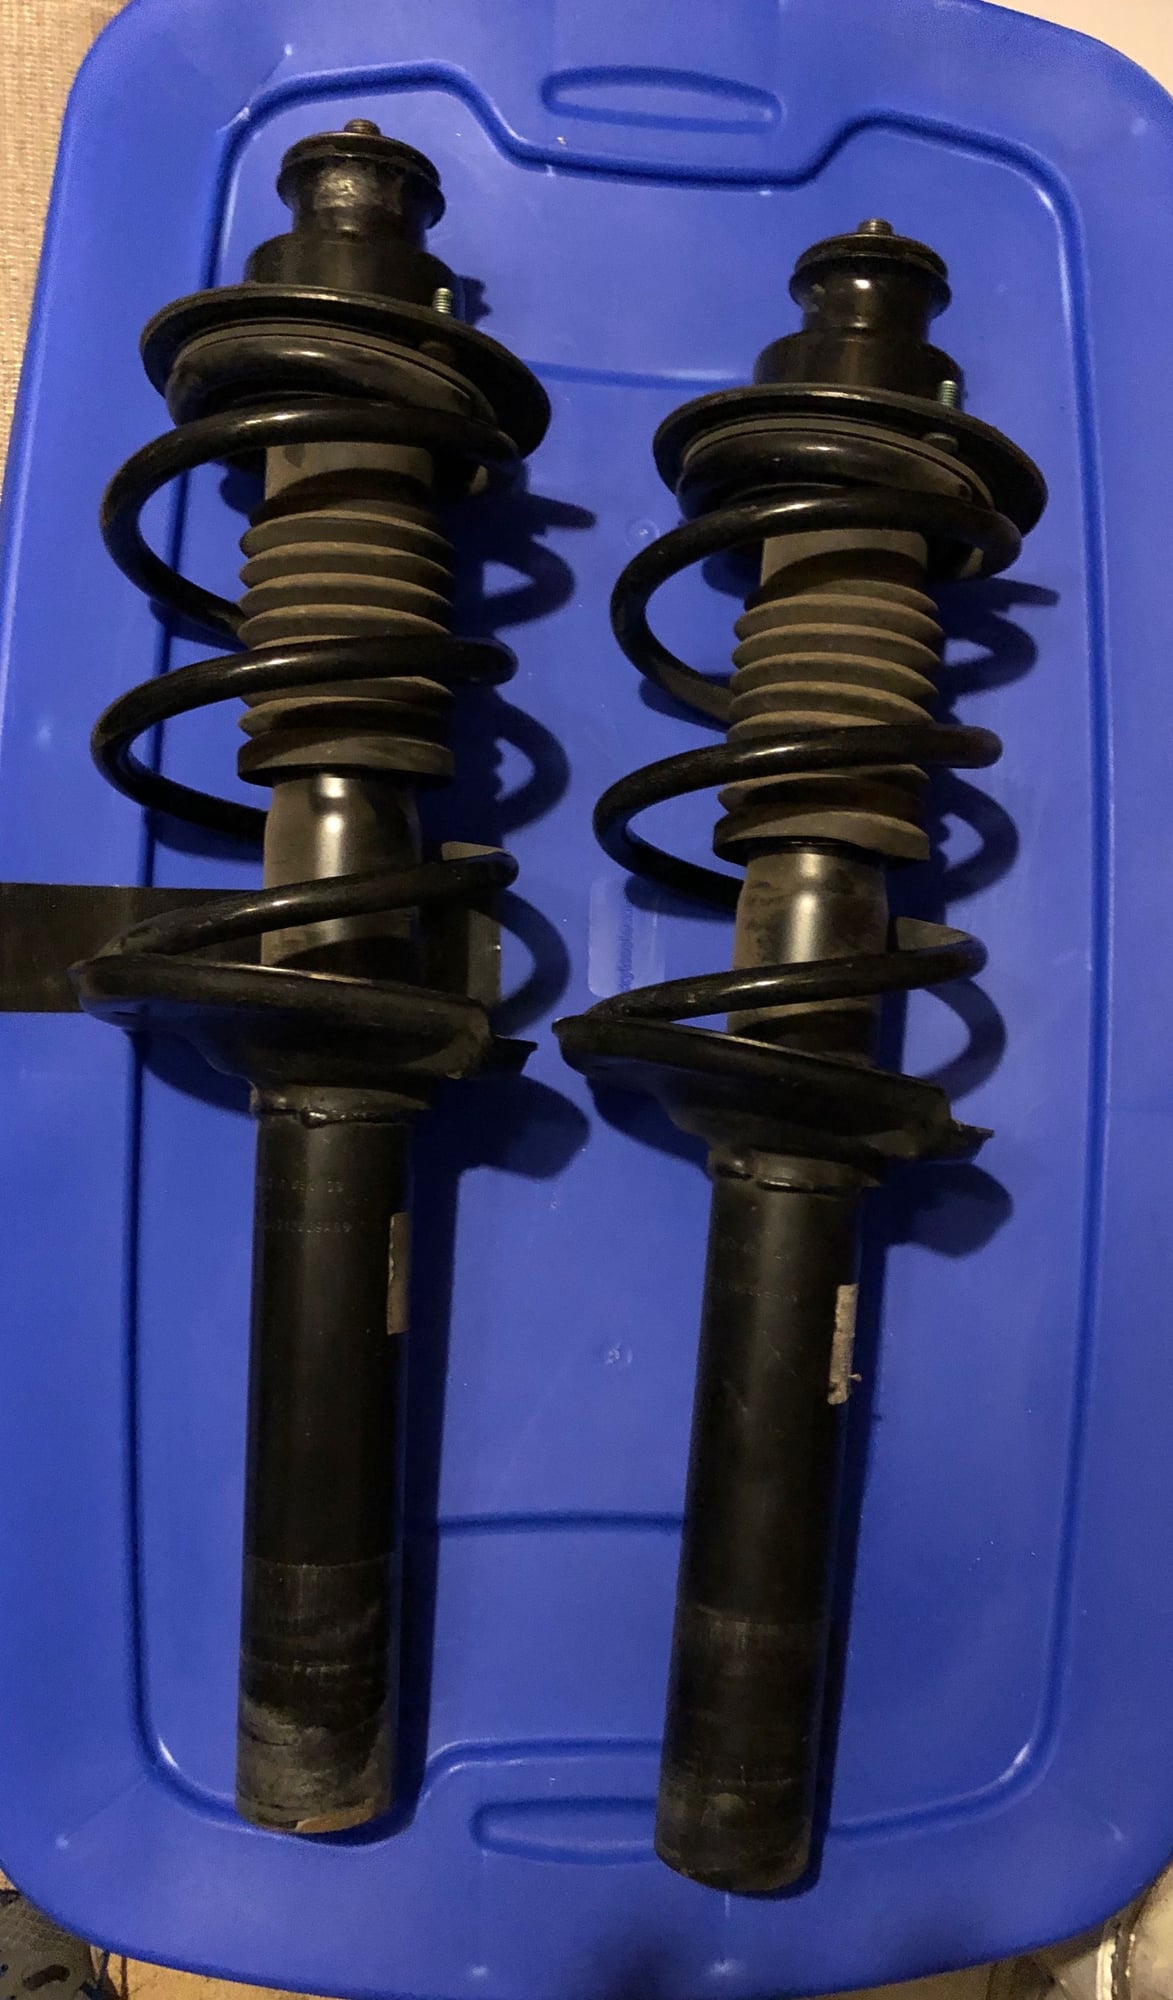 Steering/Suspension - 987.1S OEM Springs/Dampers - Used - 2006 to 2008 Porsche Cayman - Charleston, SC 29405, United States